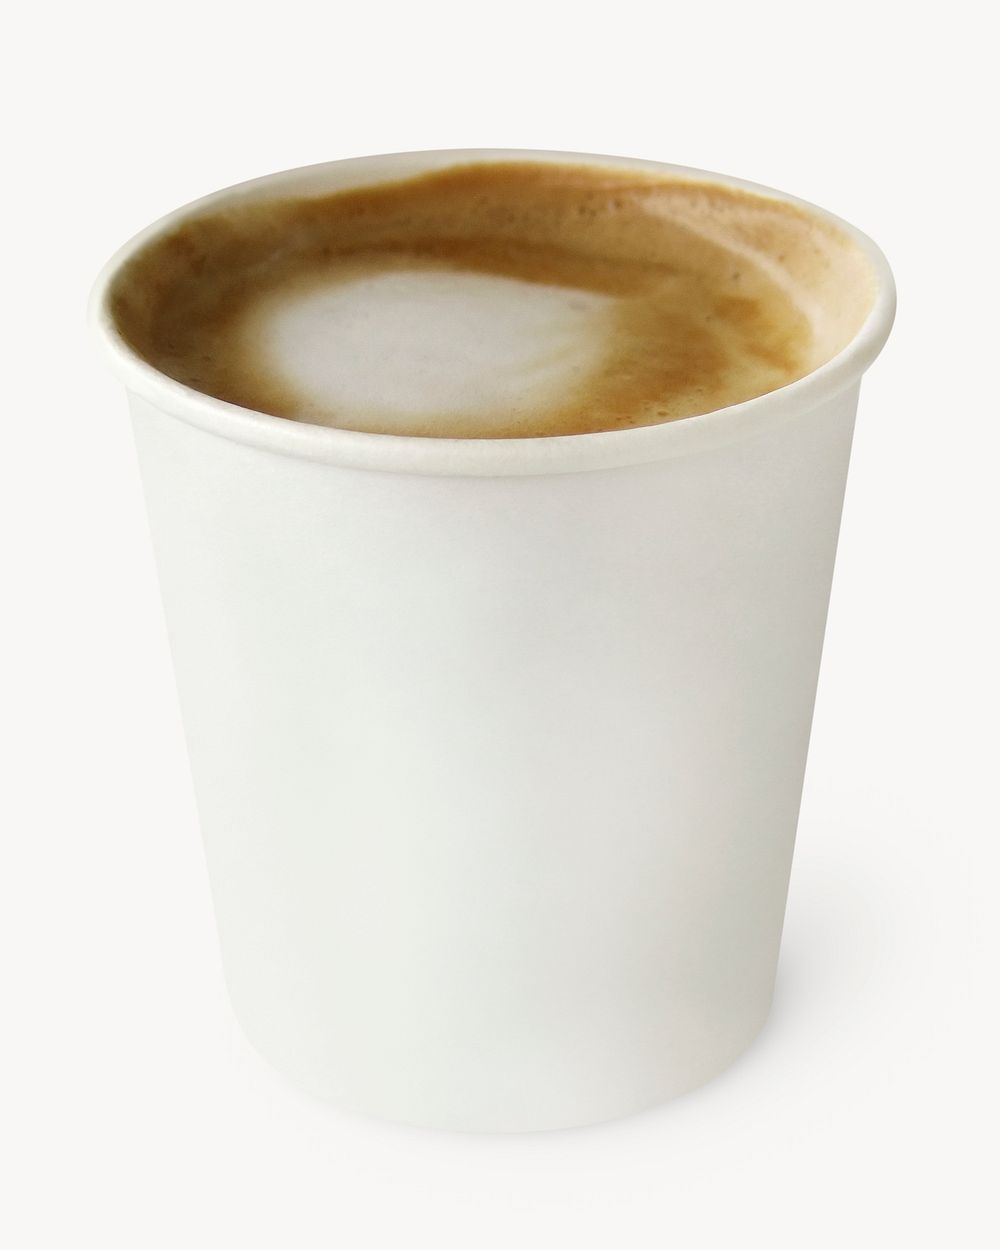 Latte cup, food and beverage